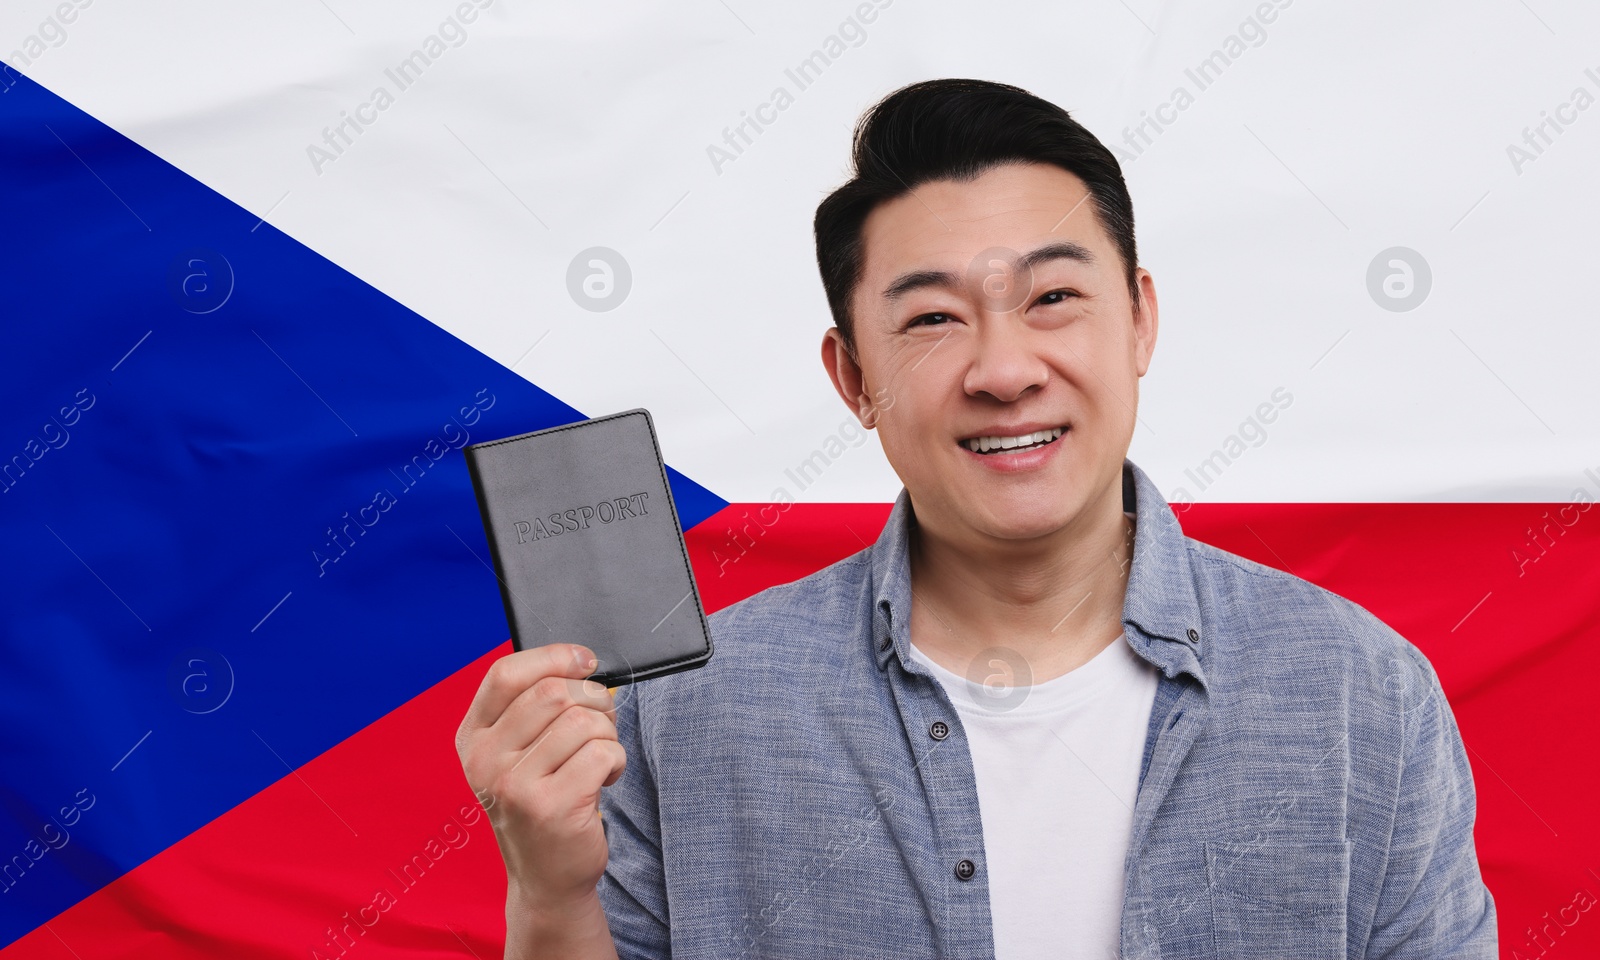 Image of Immigration. Happy man with passport against national flag of Czech Republic, space for text. Banner design